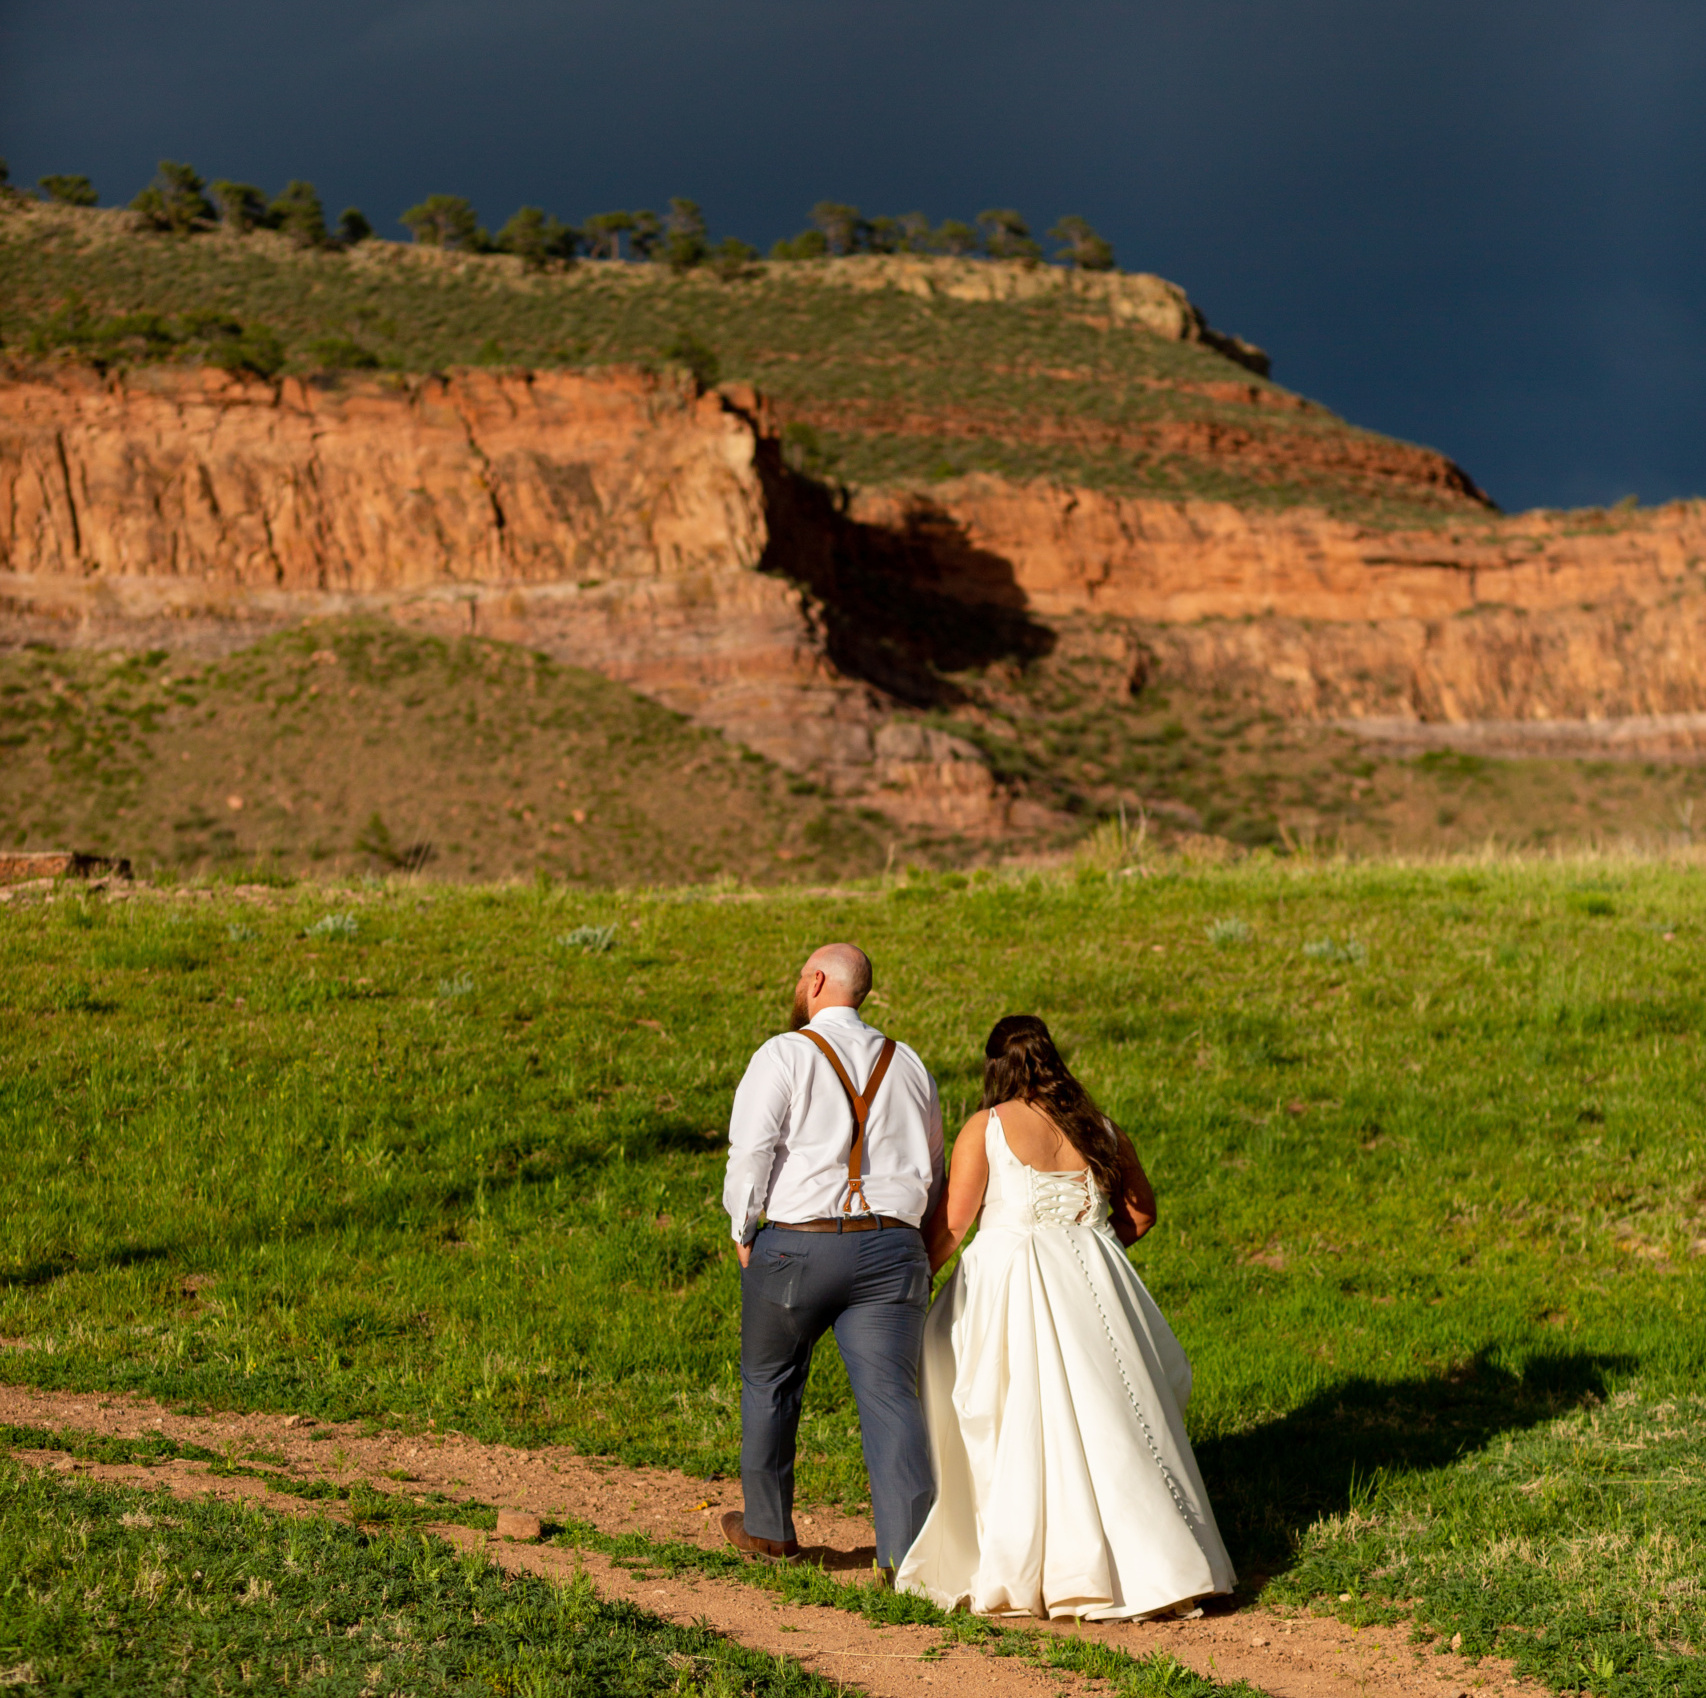 Ellis Ranch Event Center, Loveland, CO witha beautiful natural setting